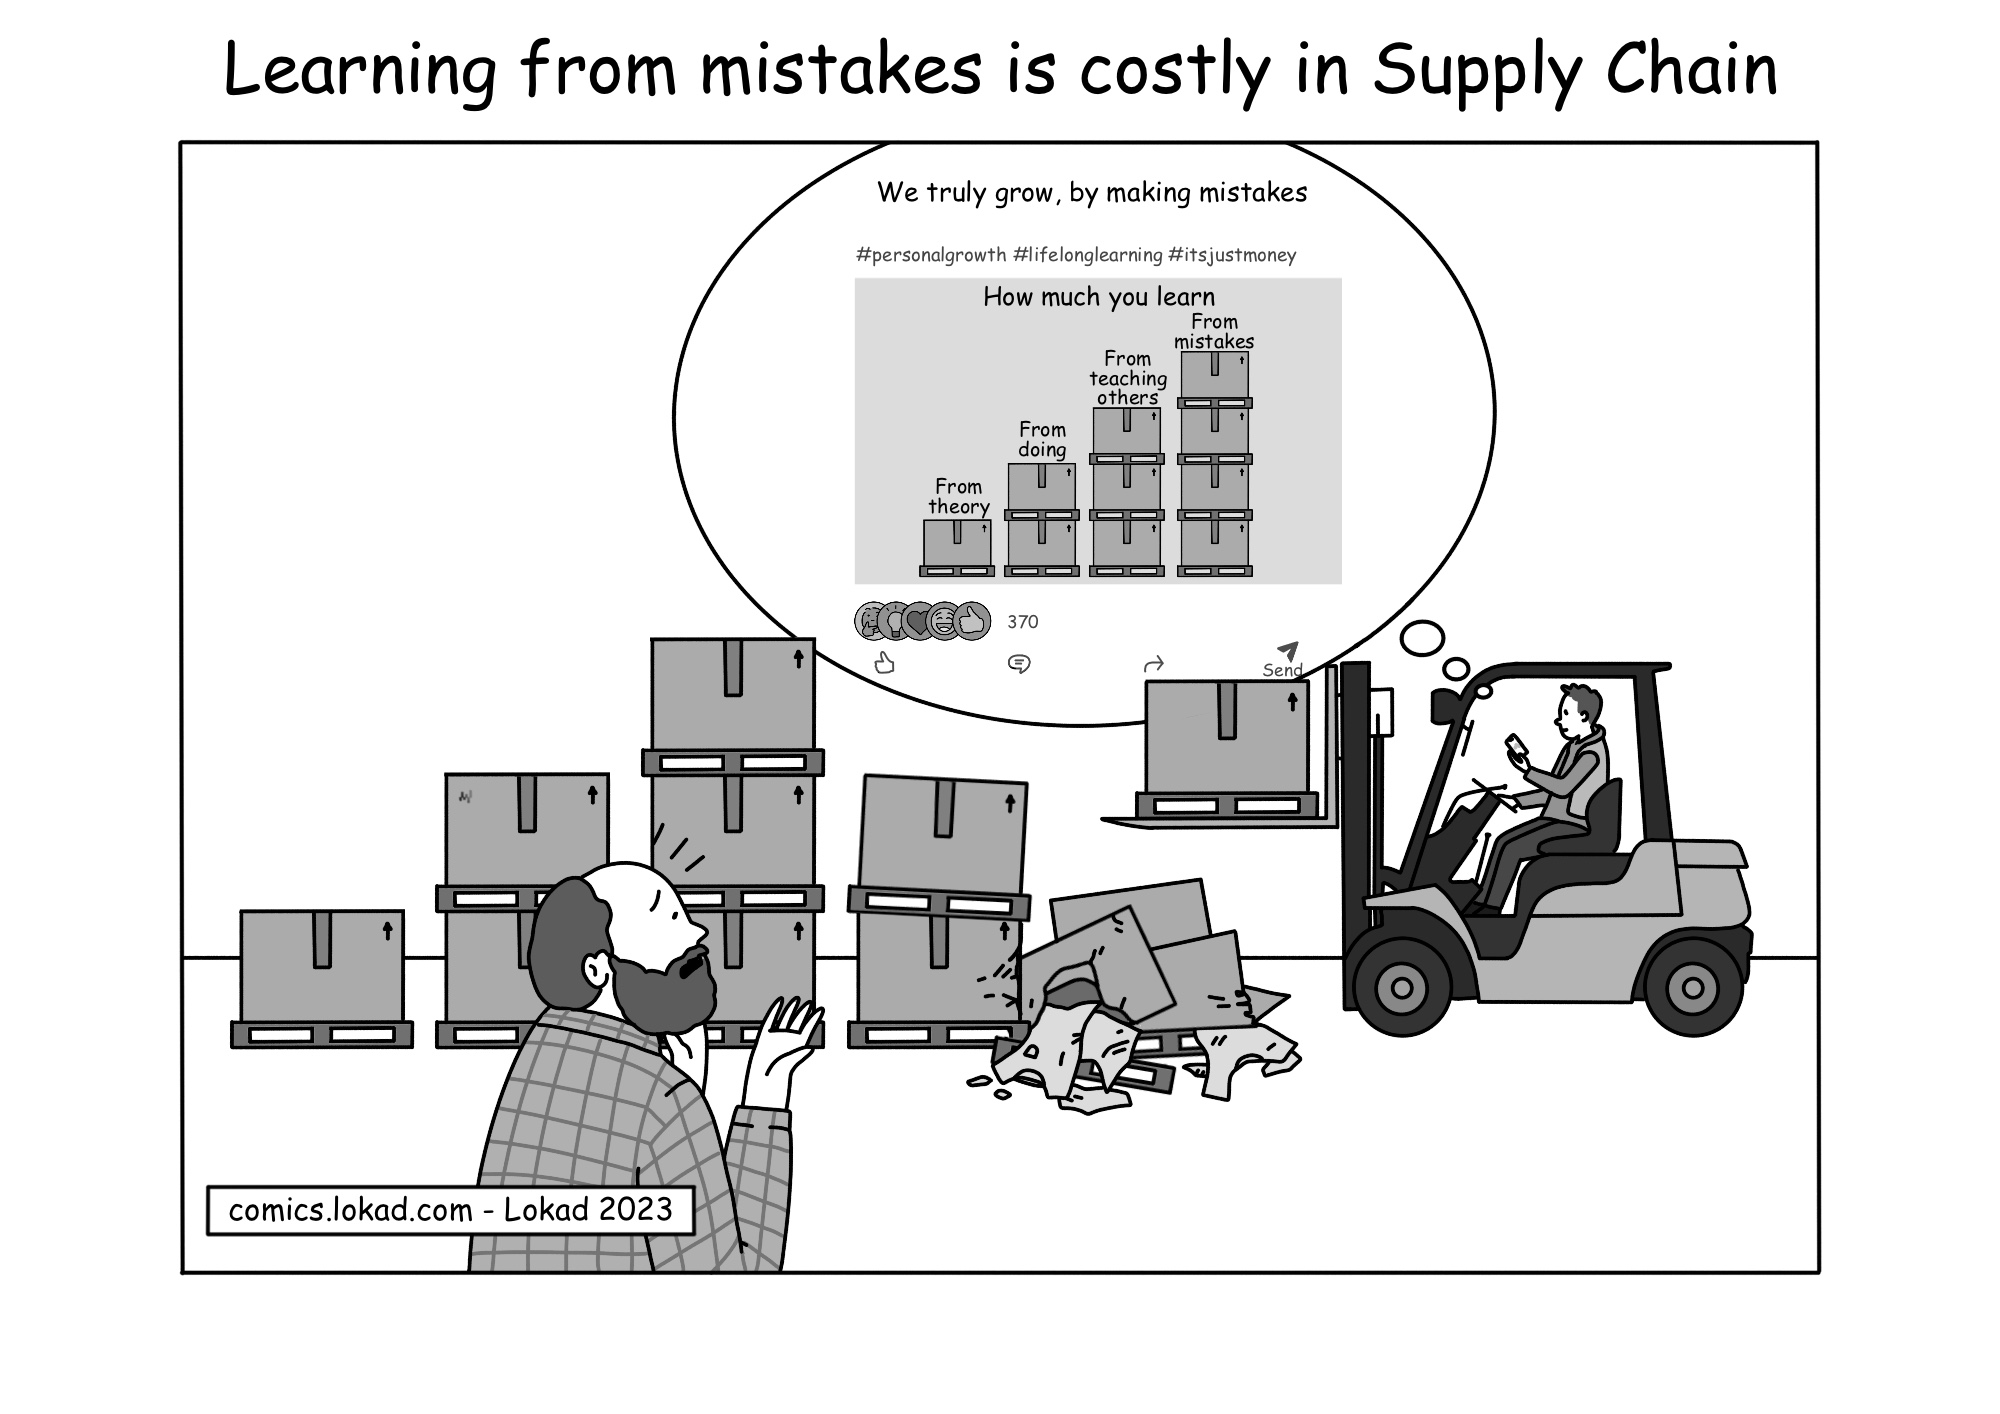 Learning from mistakes is costly in Supply Chain